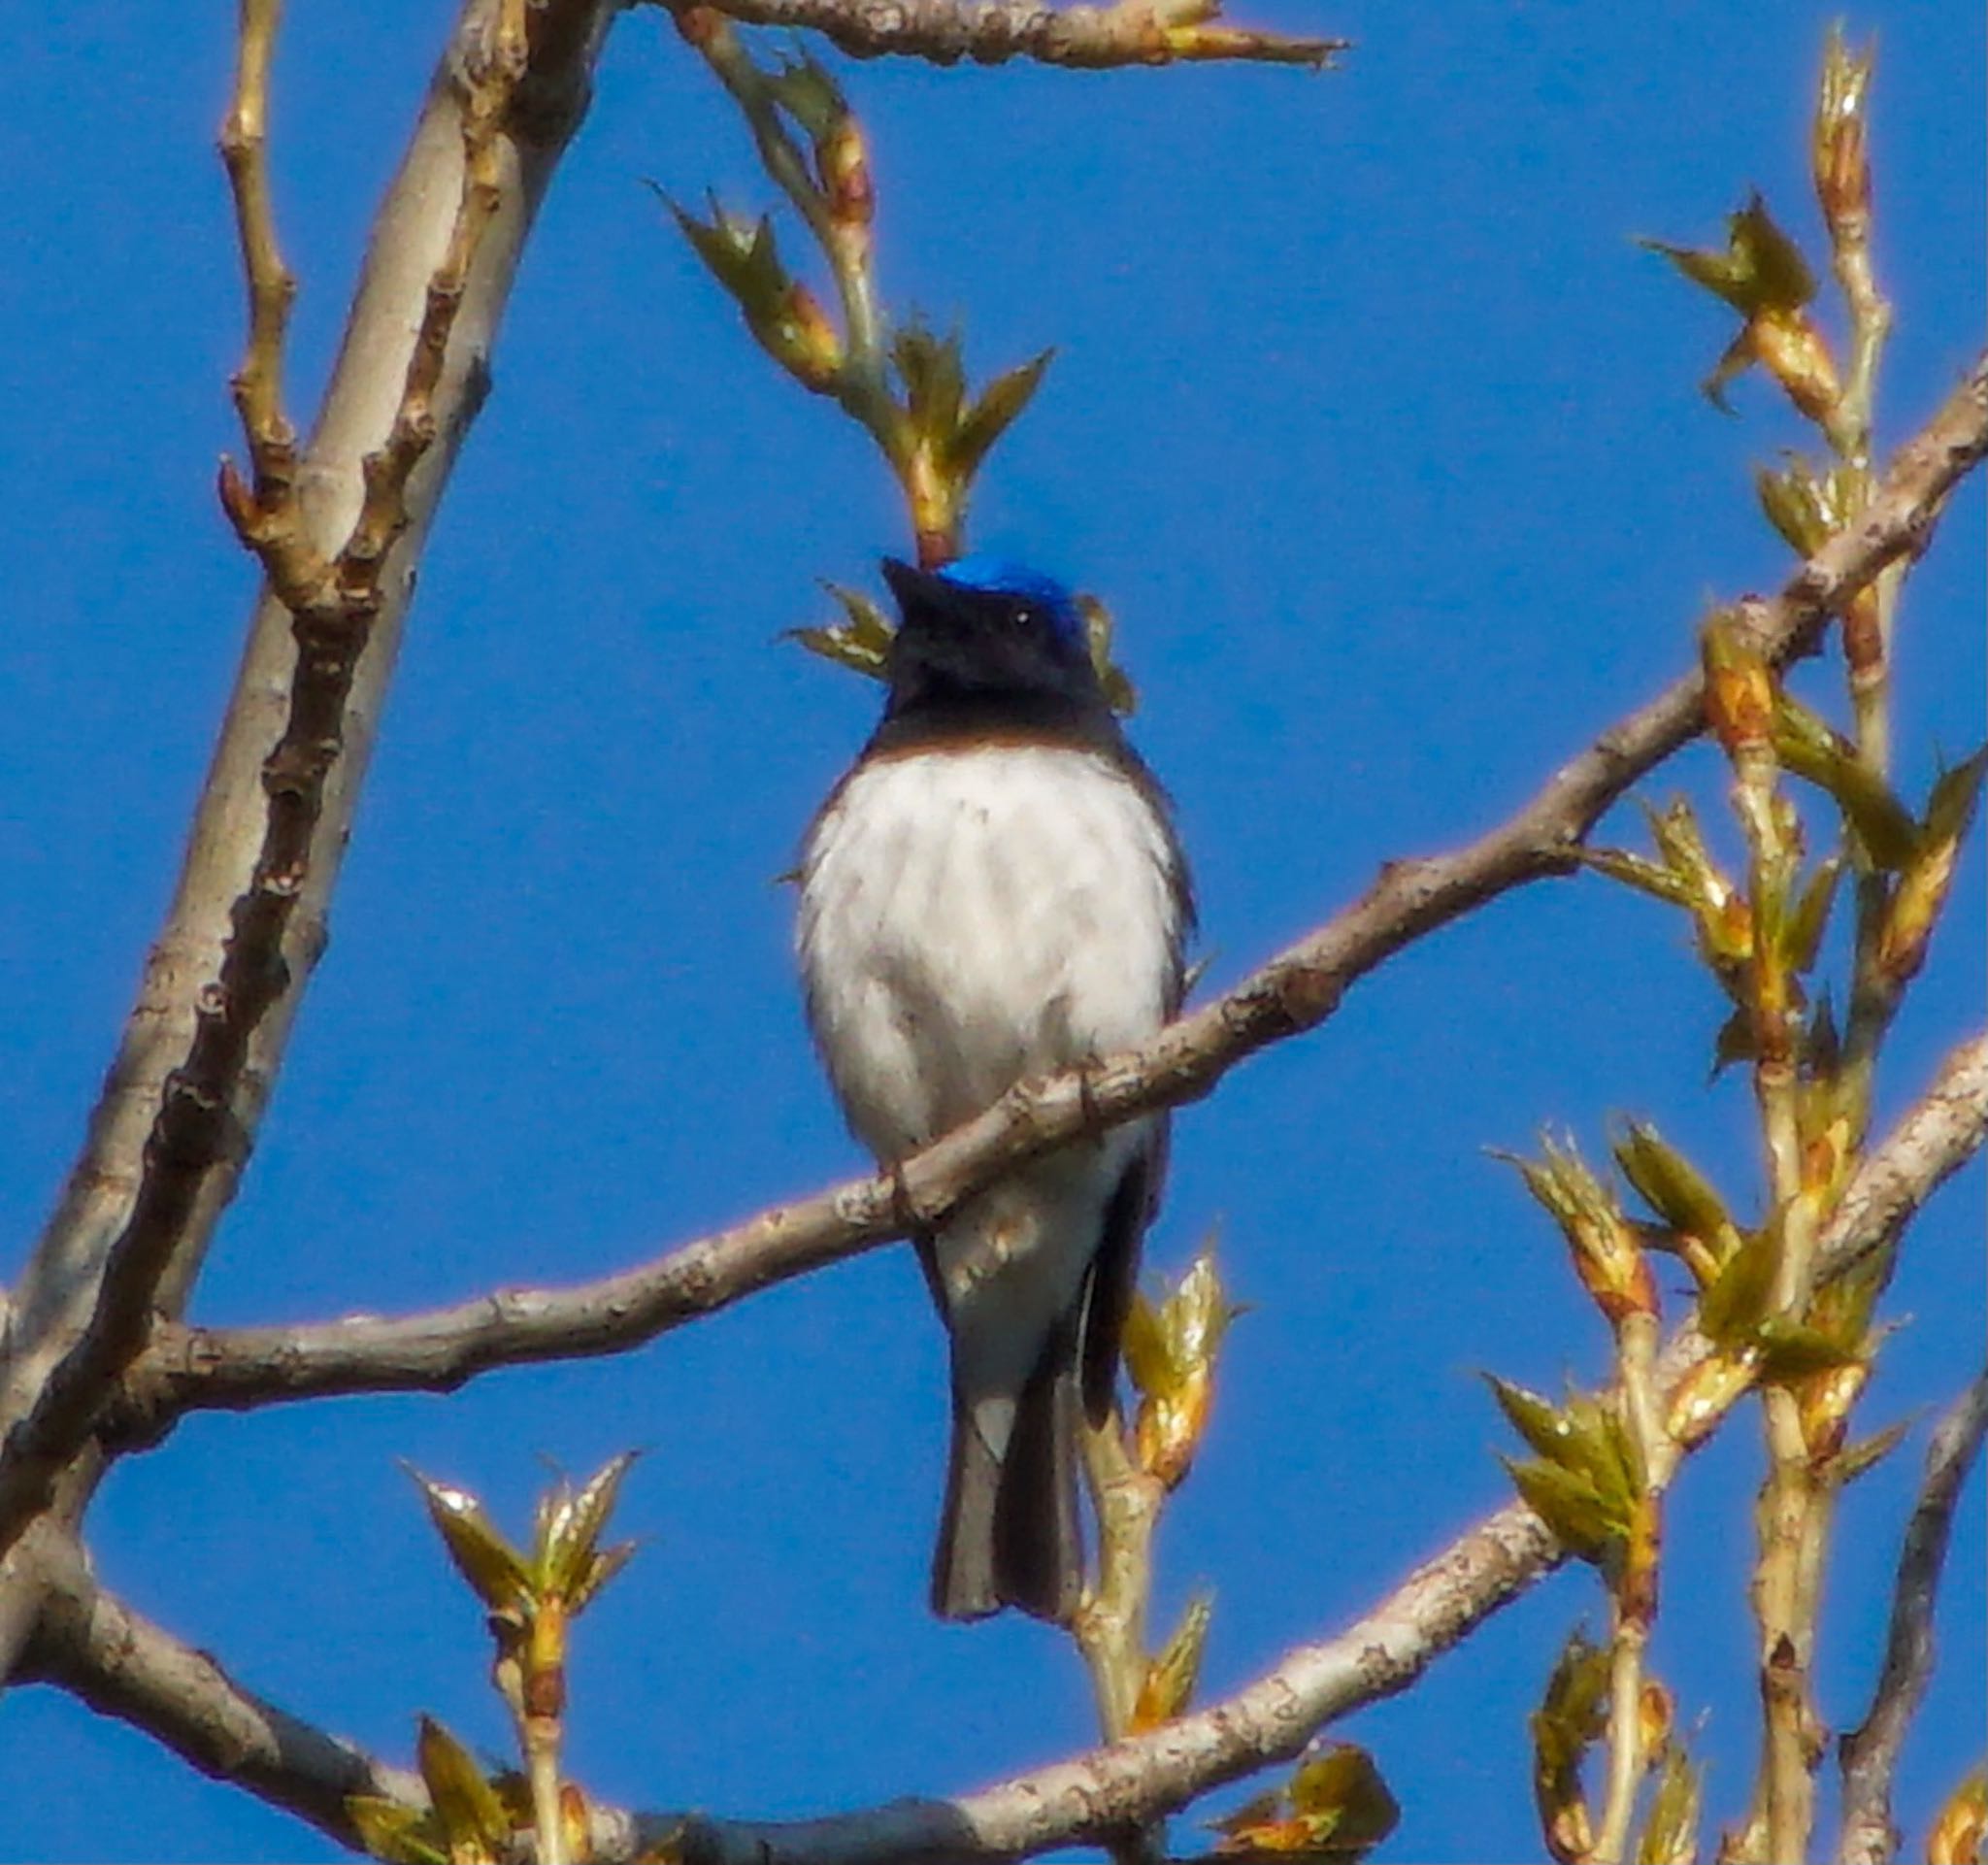 Photo of Blue-and-white Flycatcher at Makomanai Park by xuuhiro